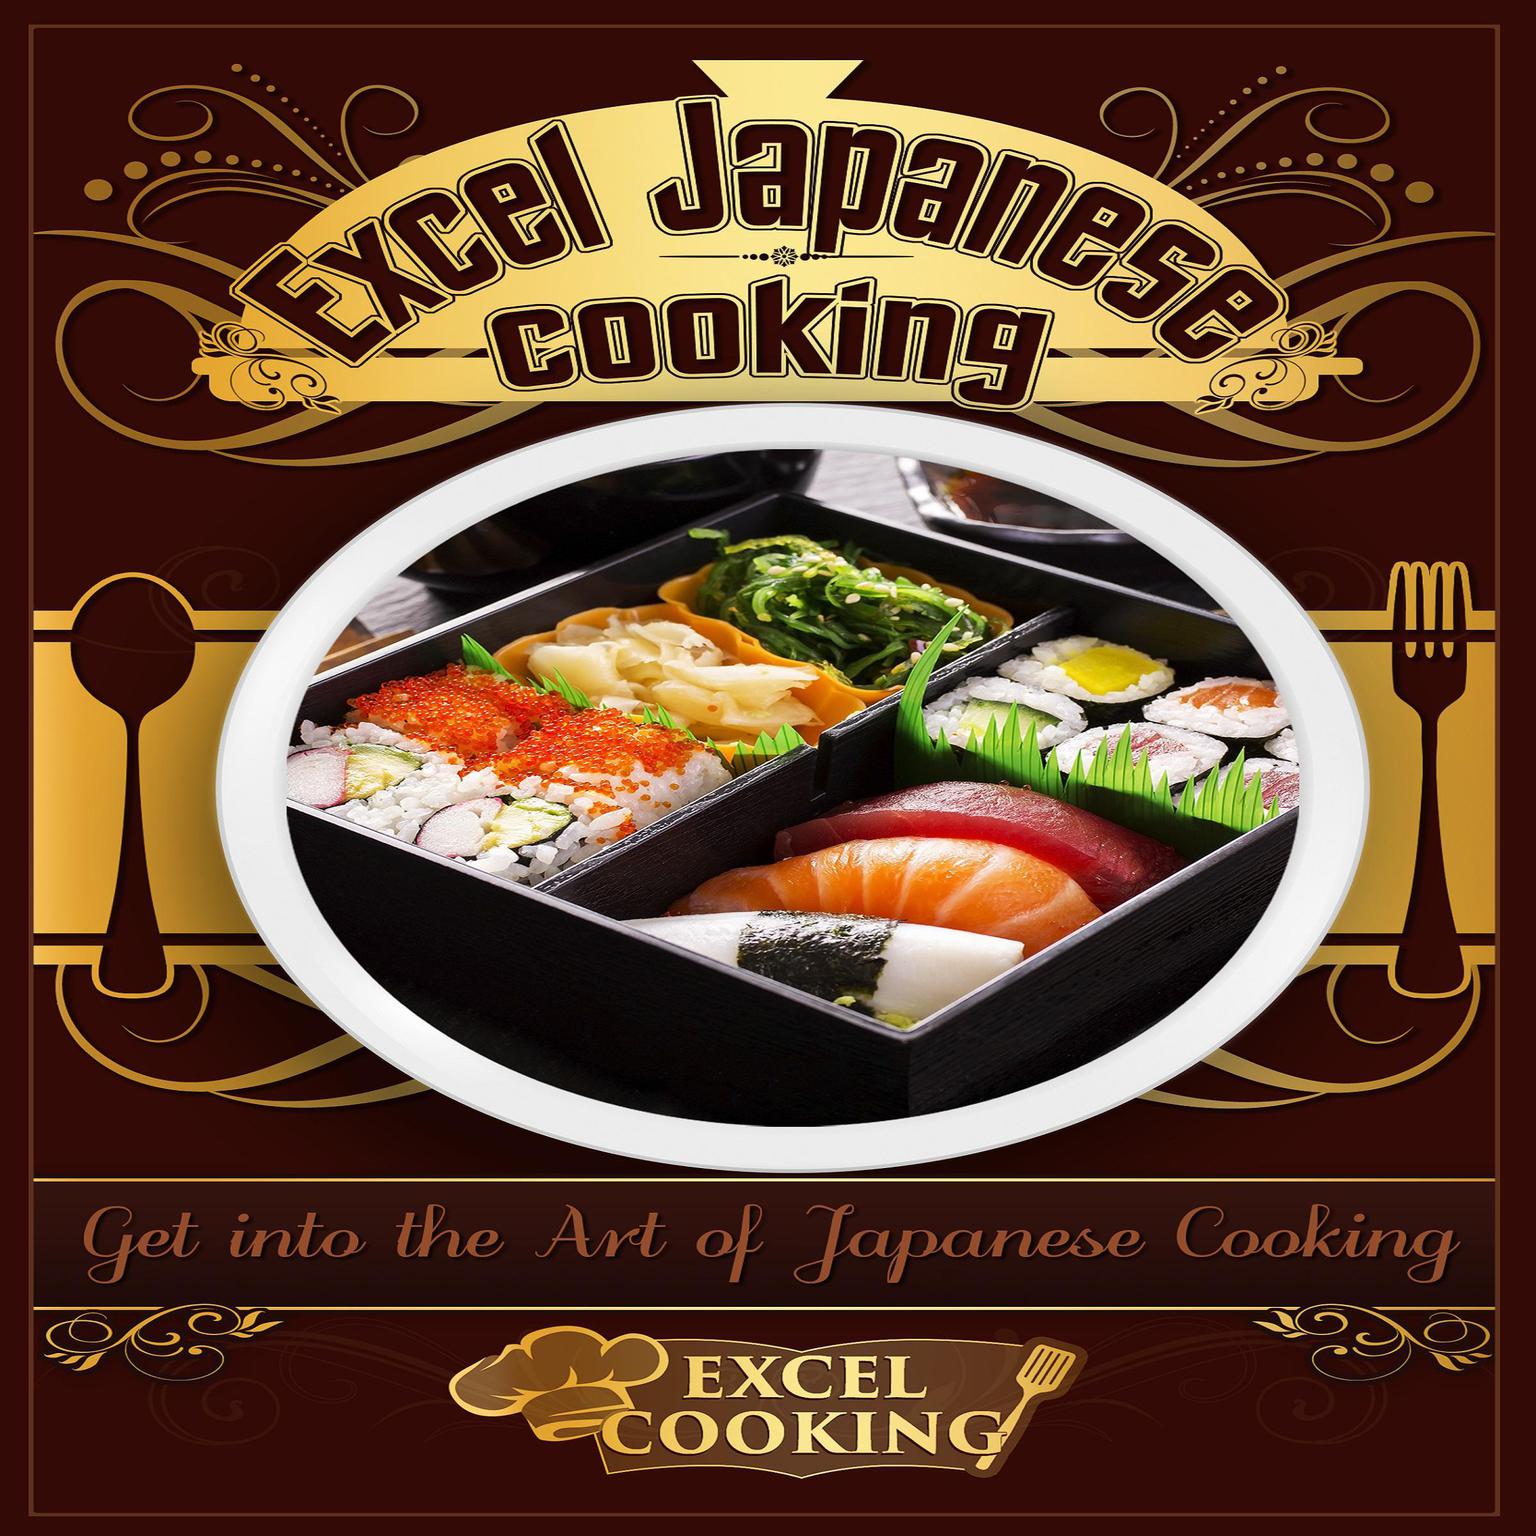 Excel Japanese Cooking: Get into the Art of Japanese Cooking Audiobook, by Excel Cooking